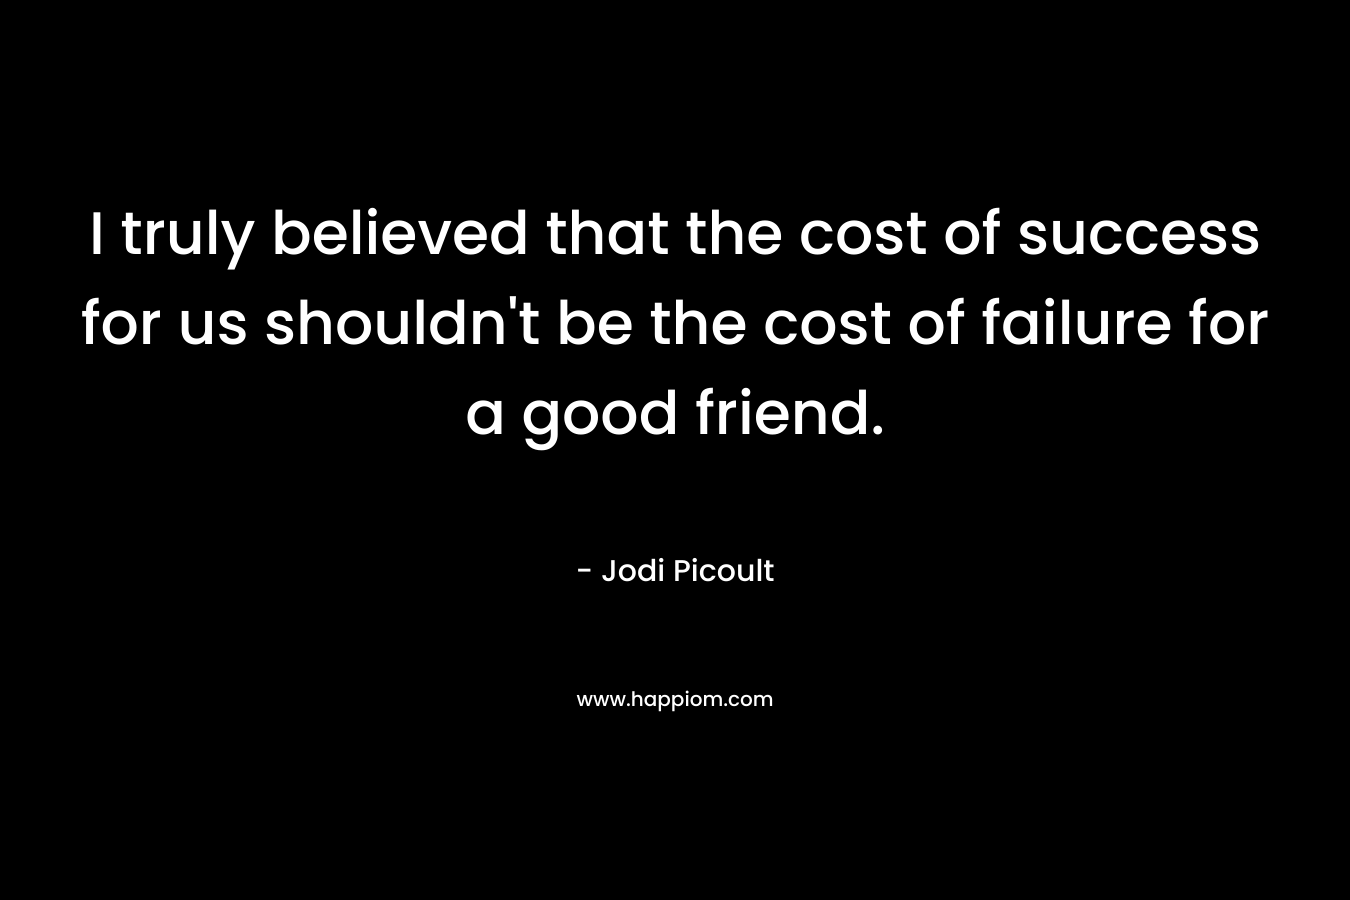 I truly believed that the cost of success for us shouldn't be the cost of failure for a good friend.